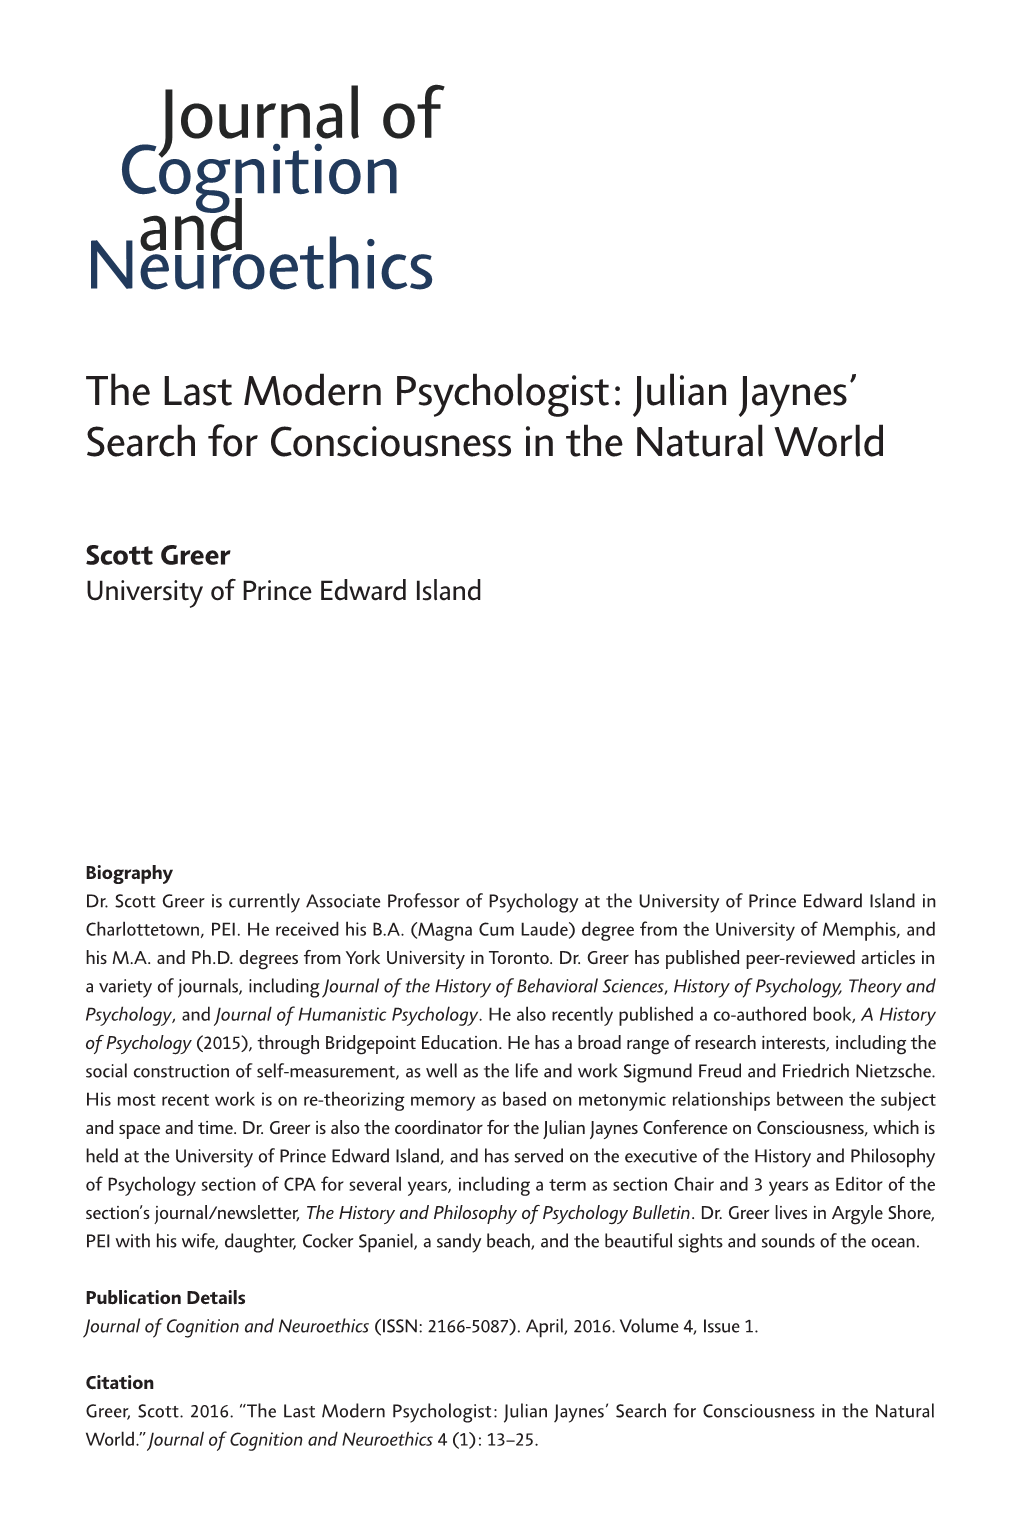 The Last Modern Psychologist: Julian Jaynes' Search for Consciousness